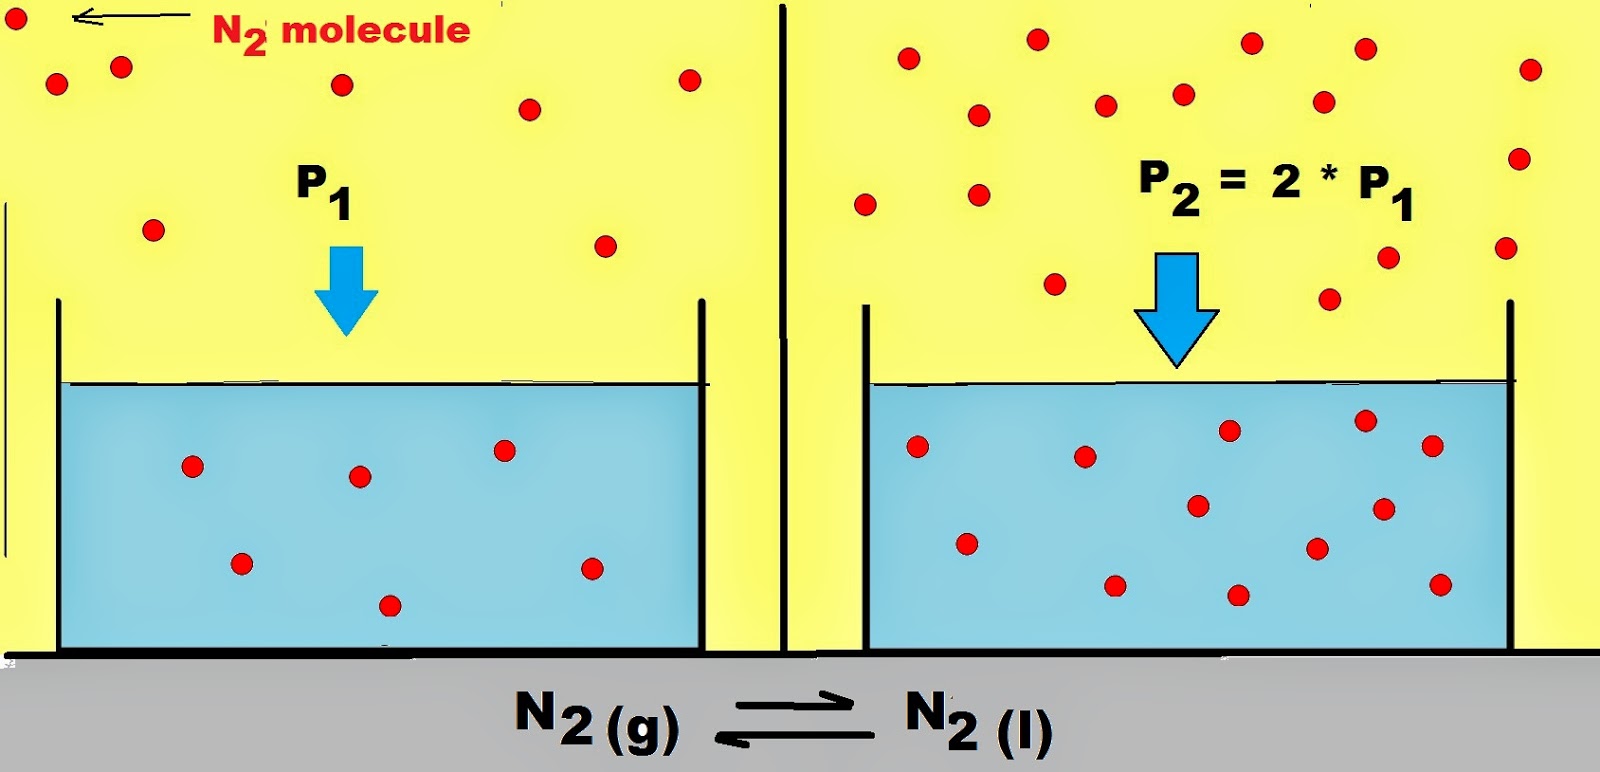 Fig. I.1: N2 equilibrium in the gaseous and liquid (dissolved) phase. The dissolving process for gases is an equilibrium. The solubility of a gas depends directly on the gas partial pressure. When the N2 partial pressure is doubled (P2 = 2 * P1) the concentration of  dissolved N2 ([N2]liquid) is also doubled.